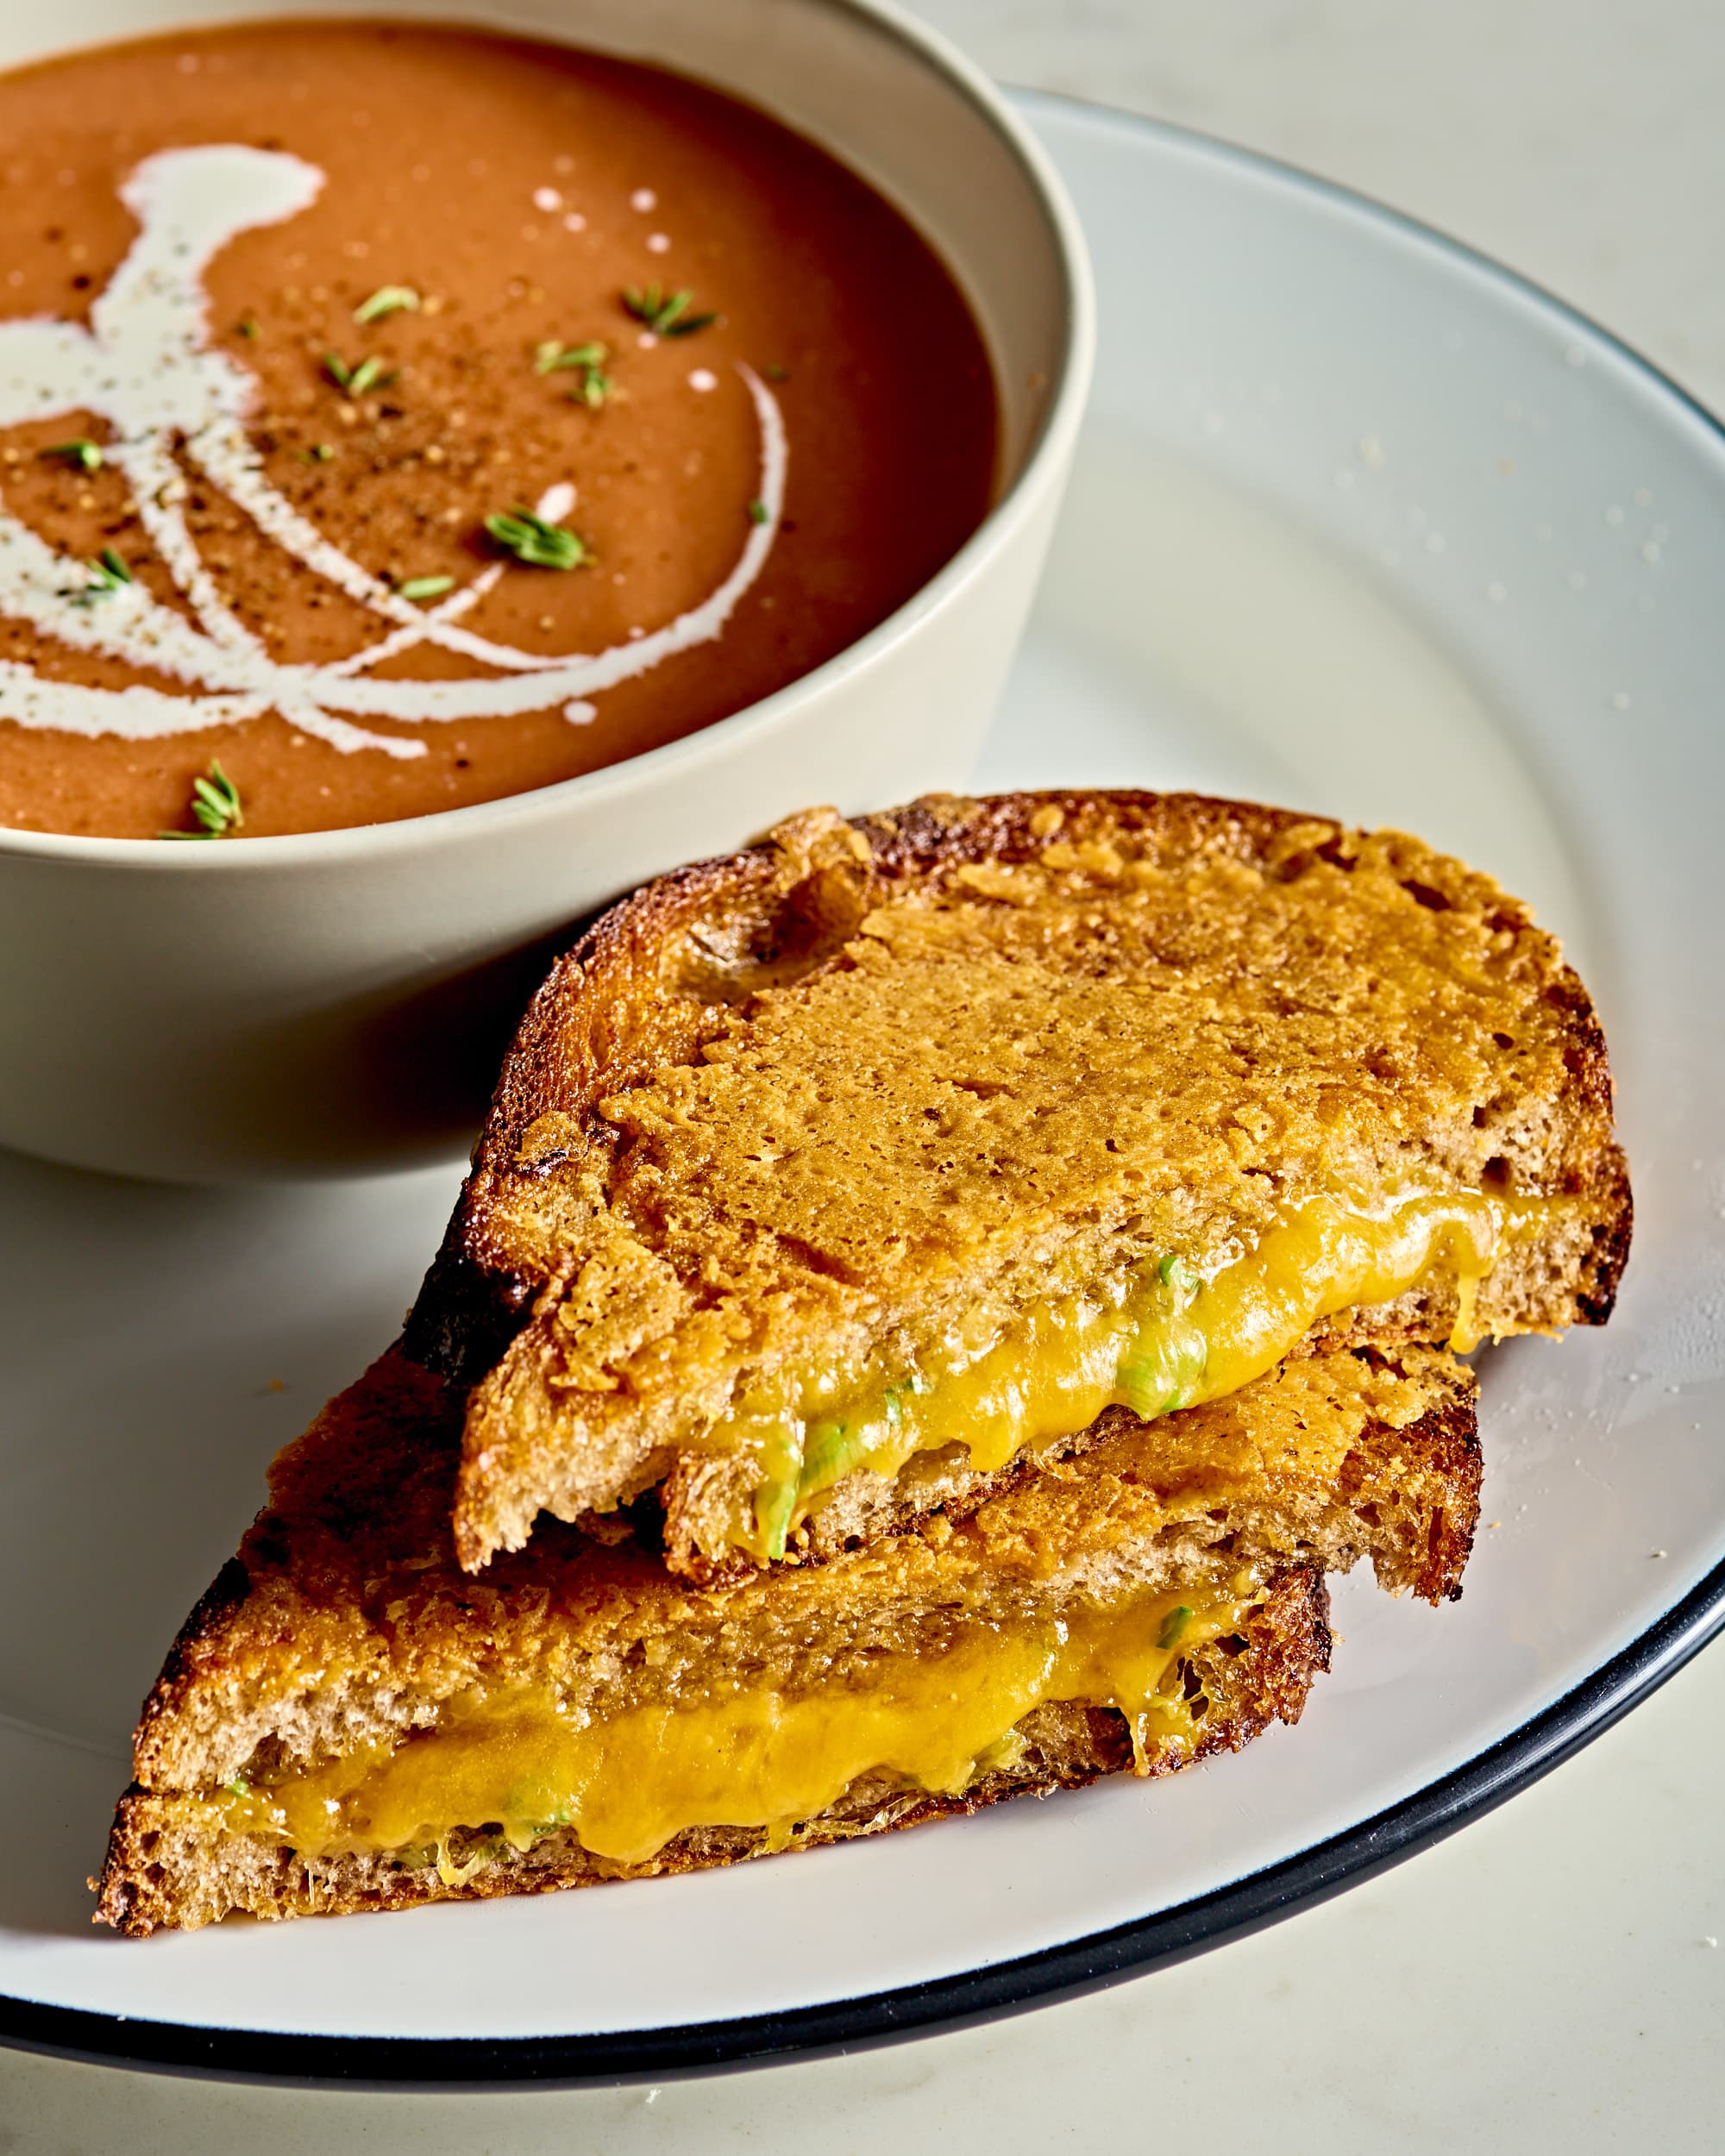 https://cdn.apartmenttherapy.info/image/upload/v1639793872/k/Photo/Recipes/2022-01-Recipe-Showdown-Grilled-Cheese/Cookie-and-Kate/2021-12-14_ATK14250_2021-12-Recipe-Showdown_Grilled-Cheese_Cookie-and-Kate.jpg